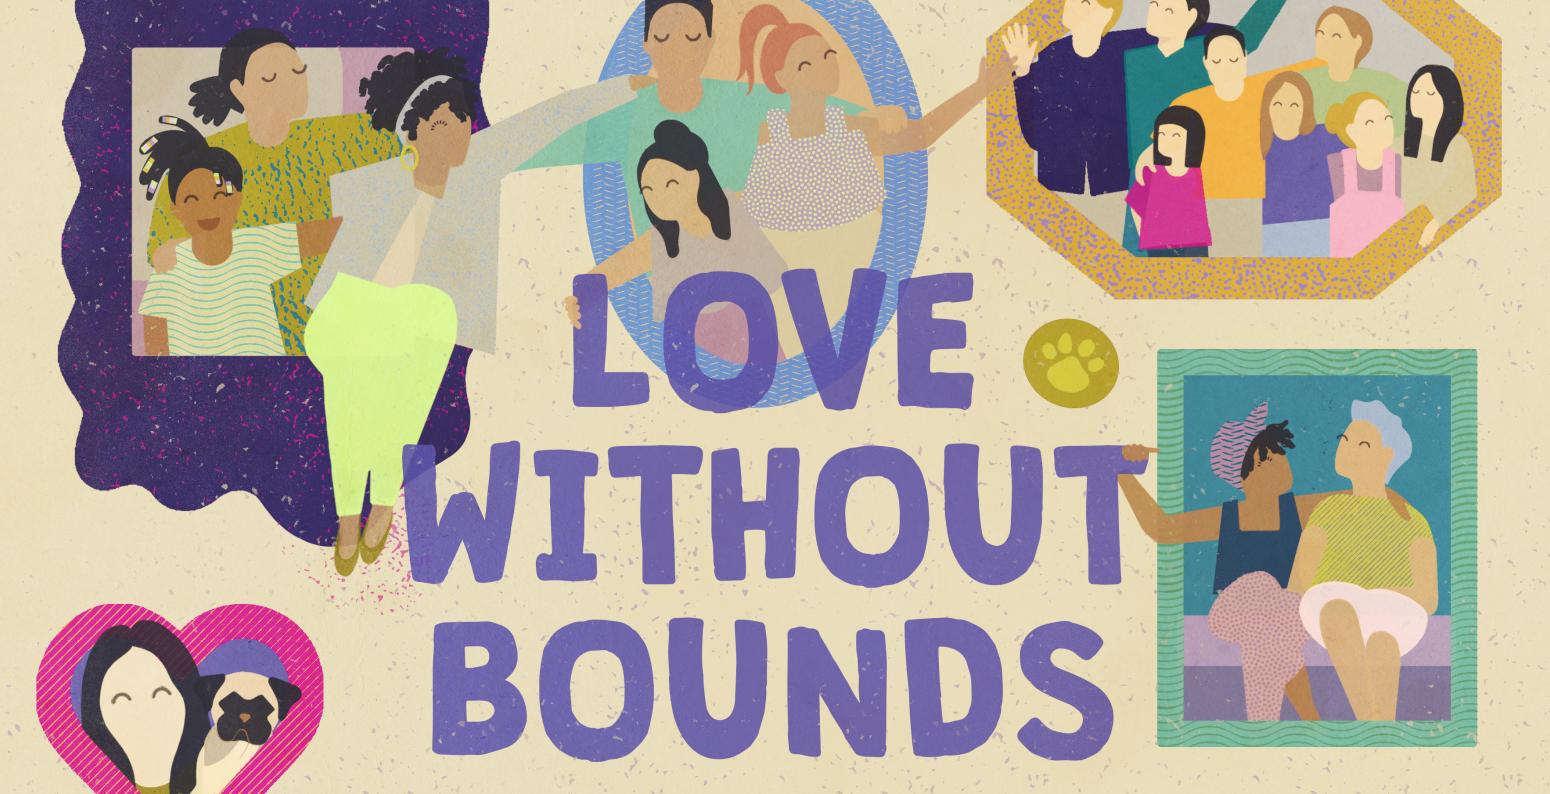 Book cover of Love Without Bounds, showing different families set in an assortment of frames.